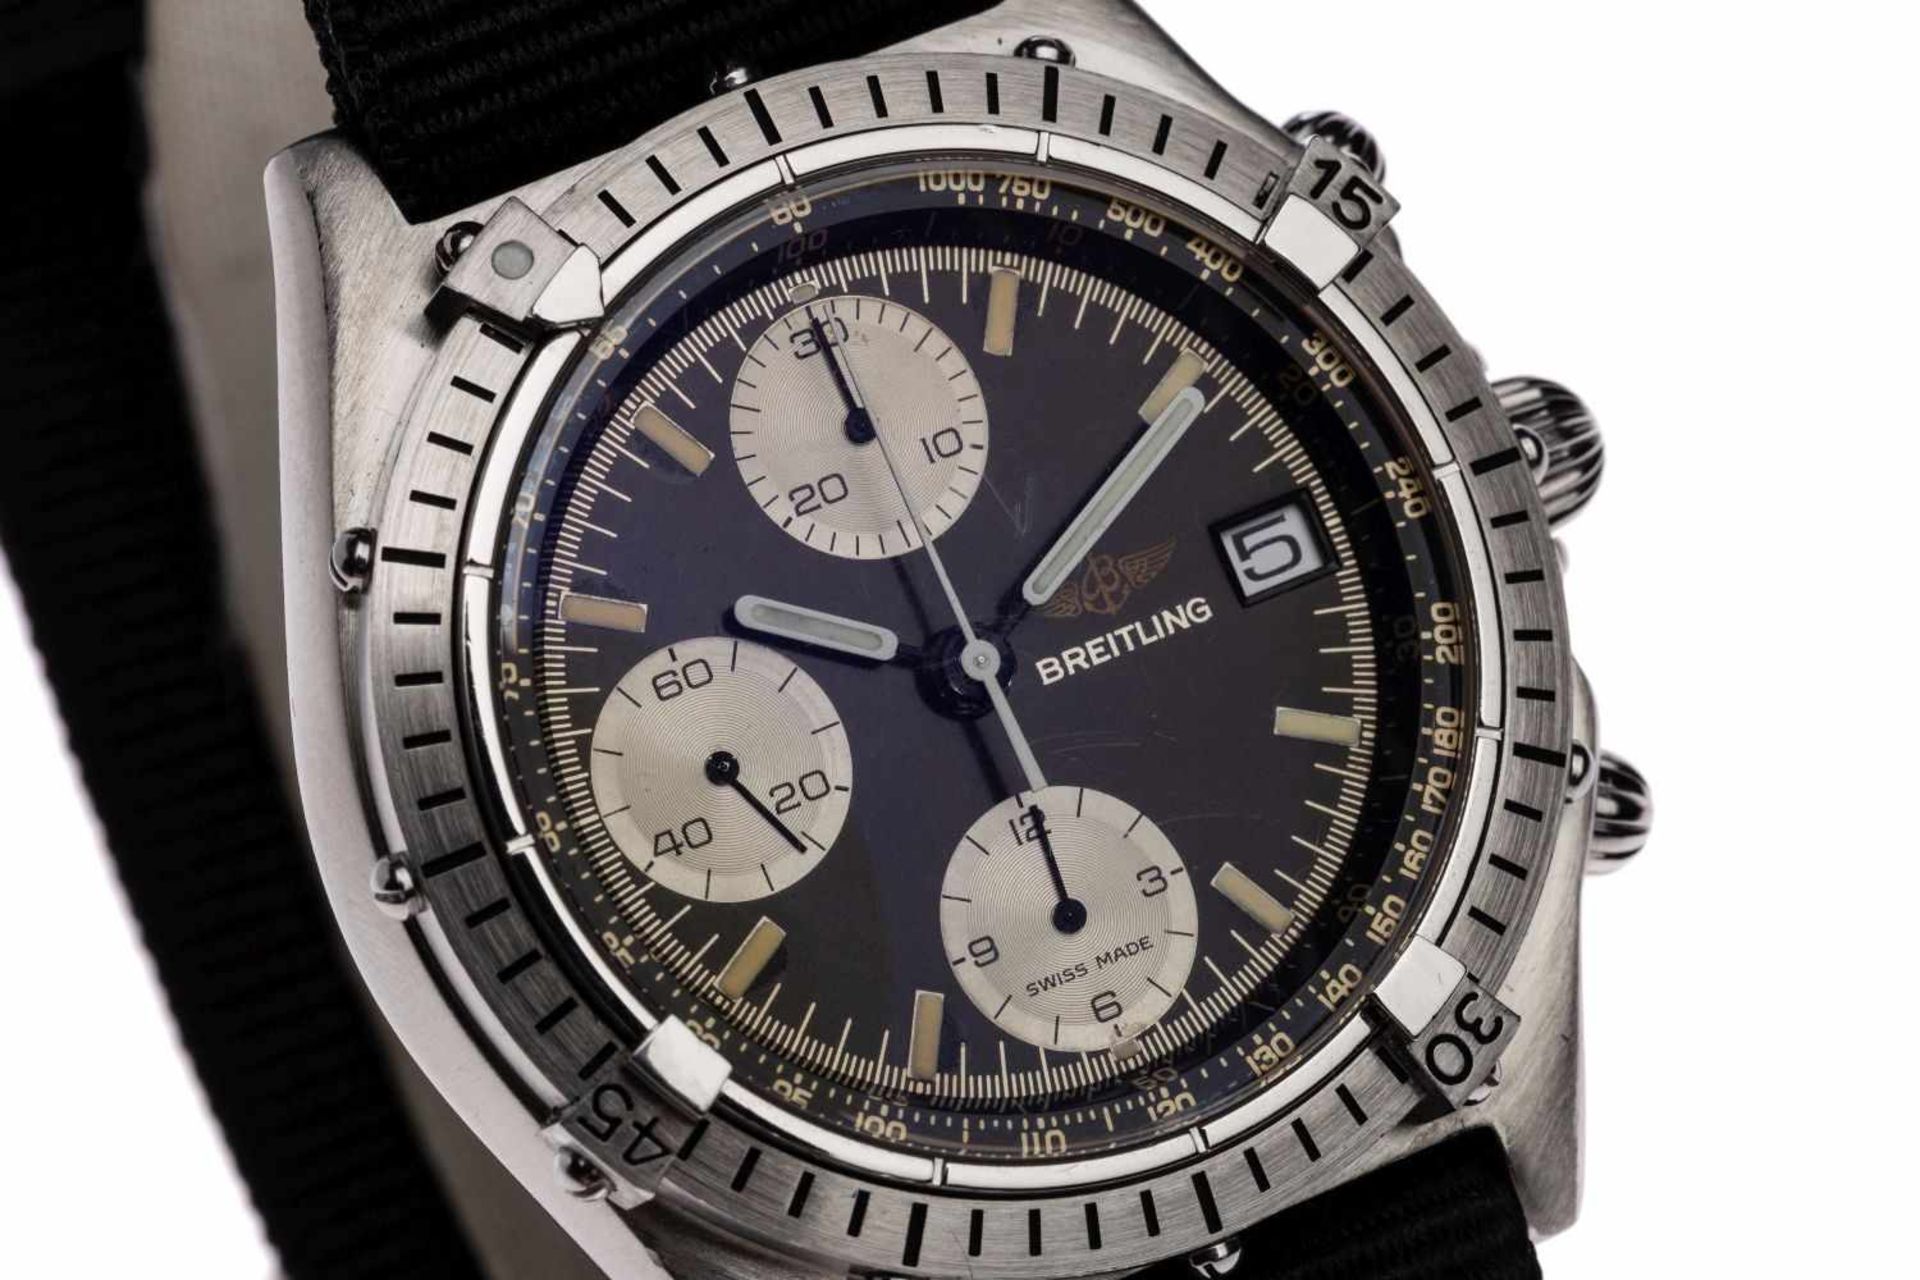 Breitling ChronomatUnisex watch Breitling Chronomat in steel from the 90s, automatic movement with - Image 2 of 2